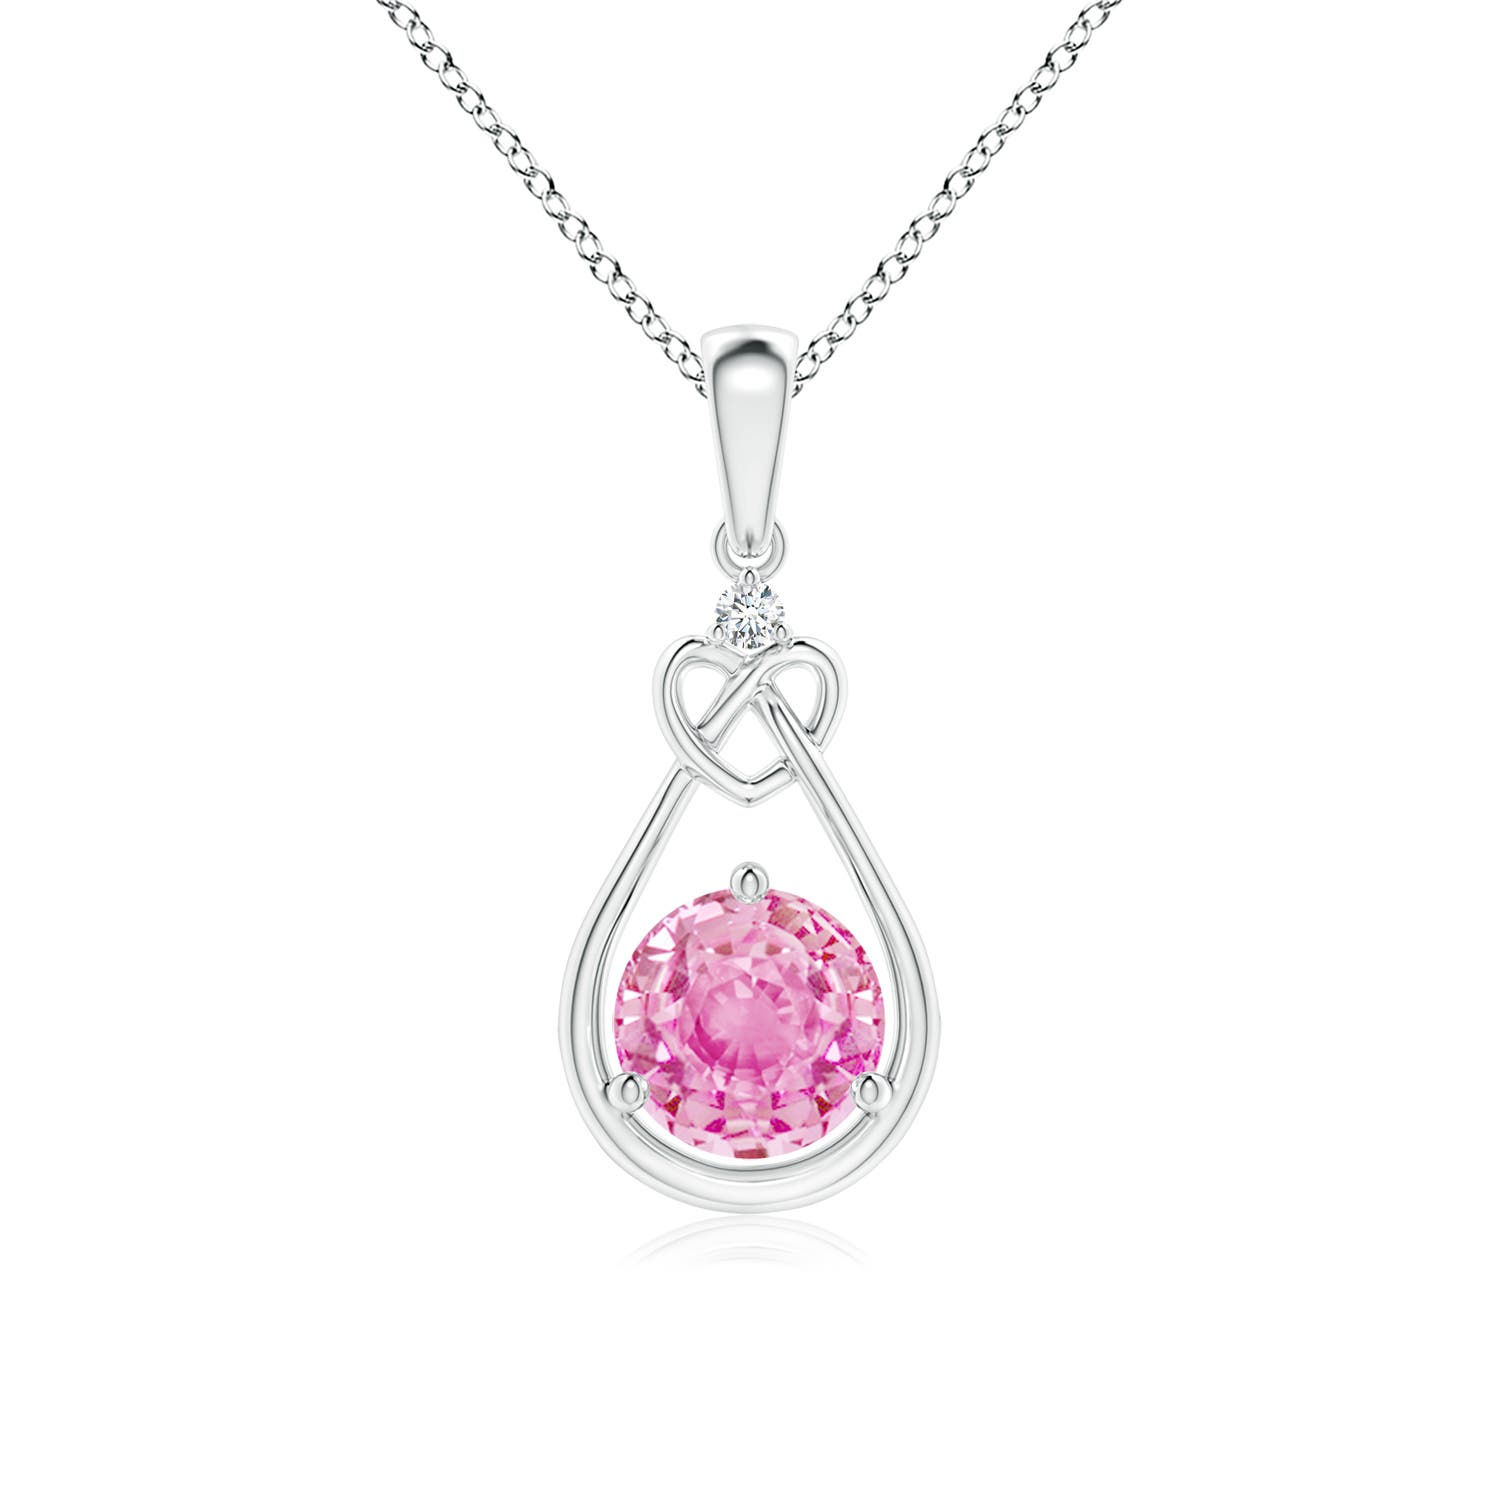 A - Pink Sapphire / 1.01 CT / 14 KT White Gold